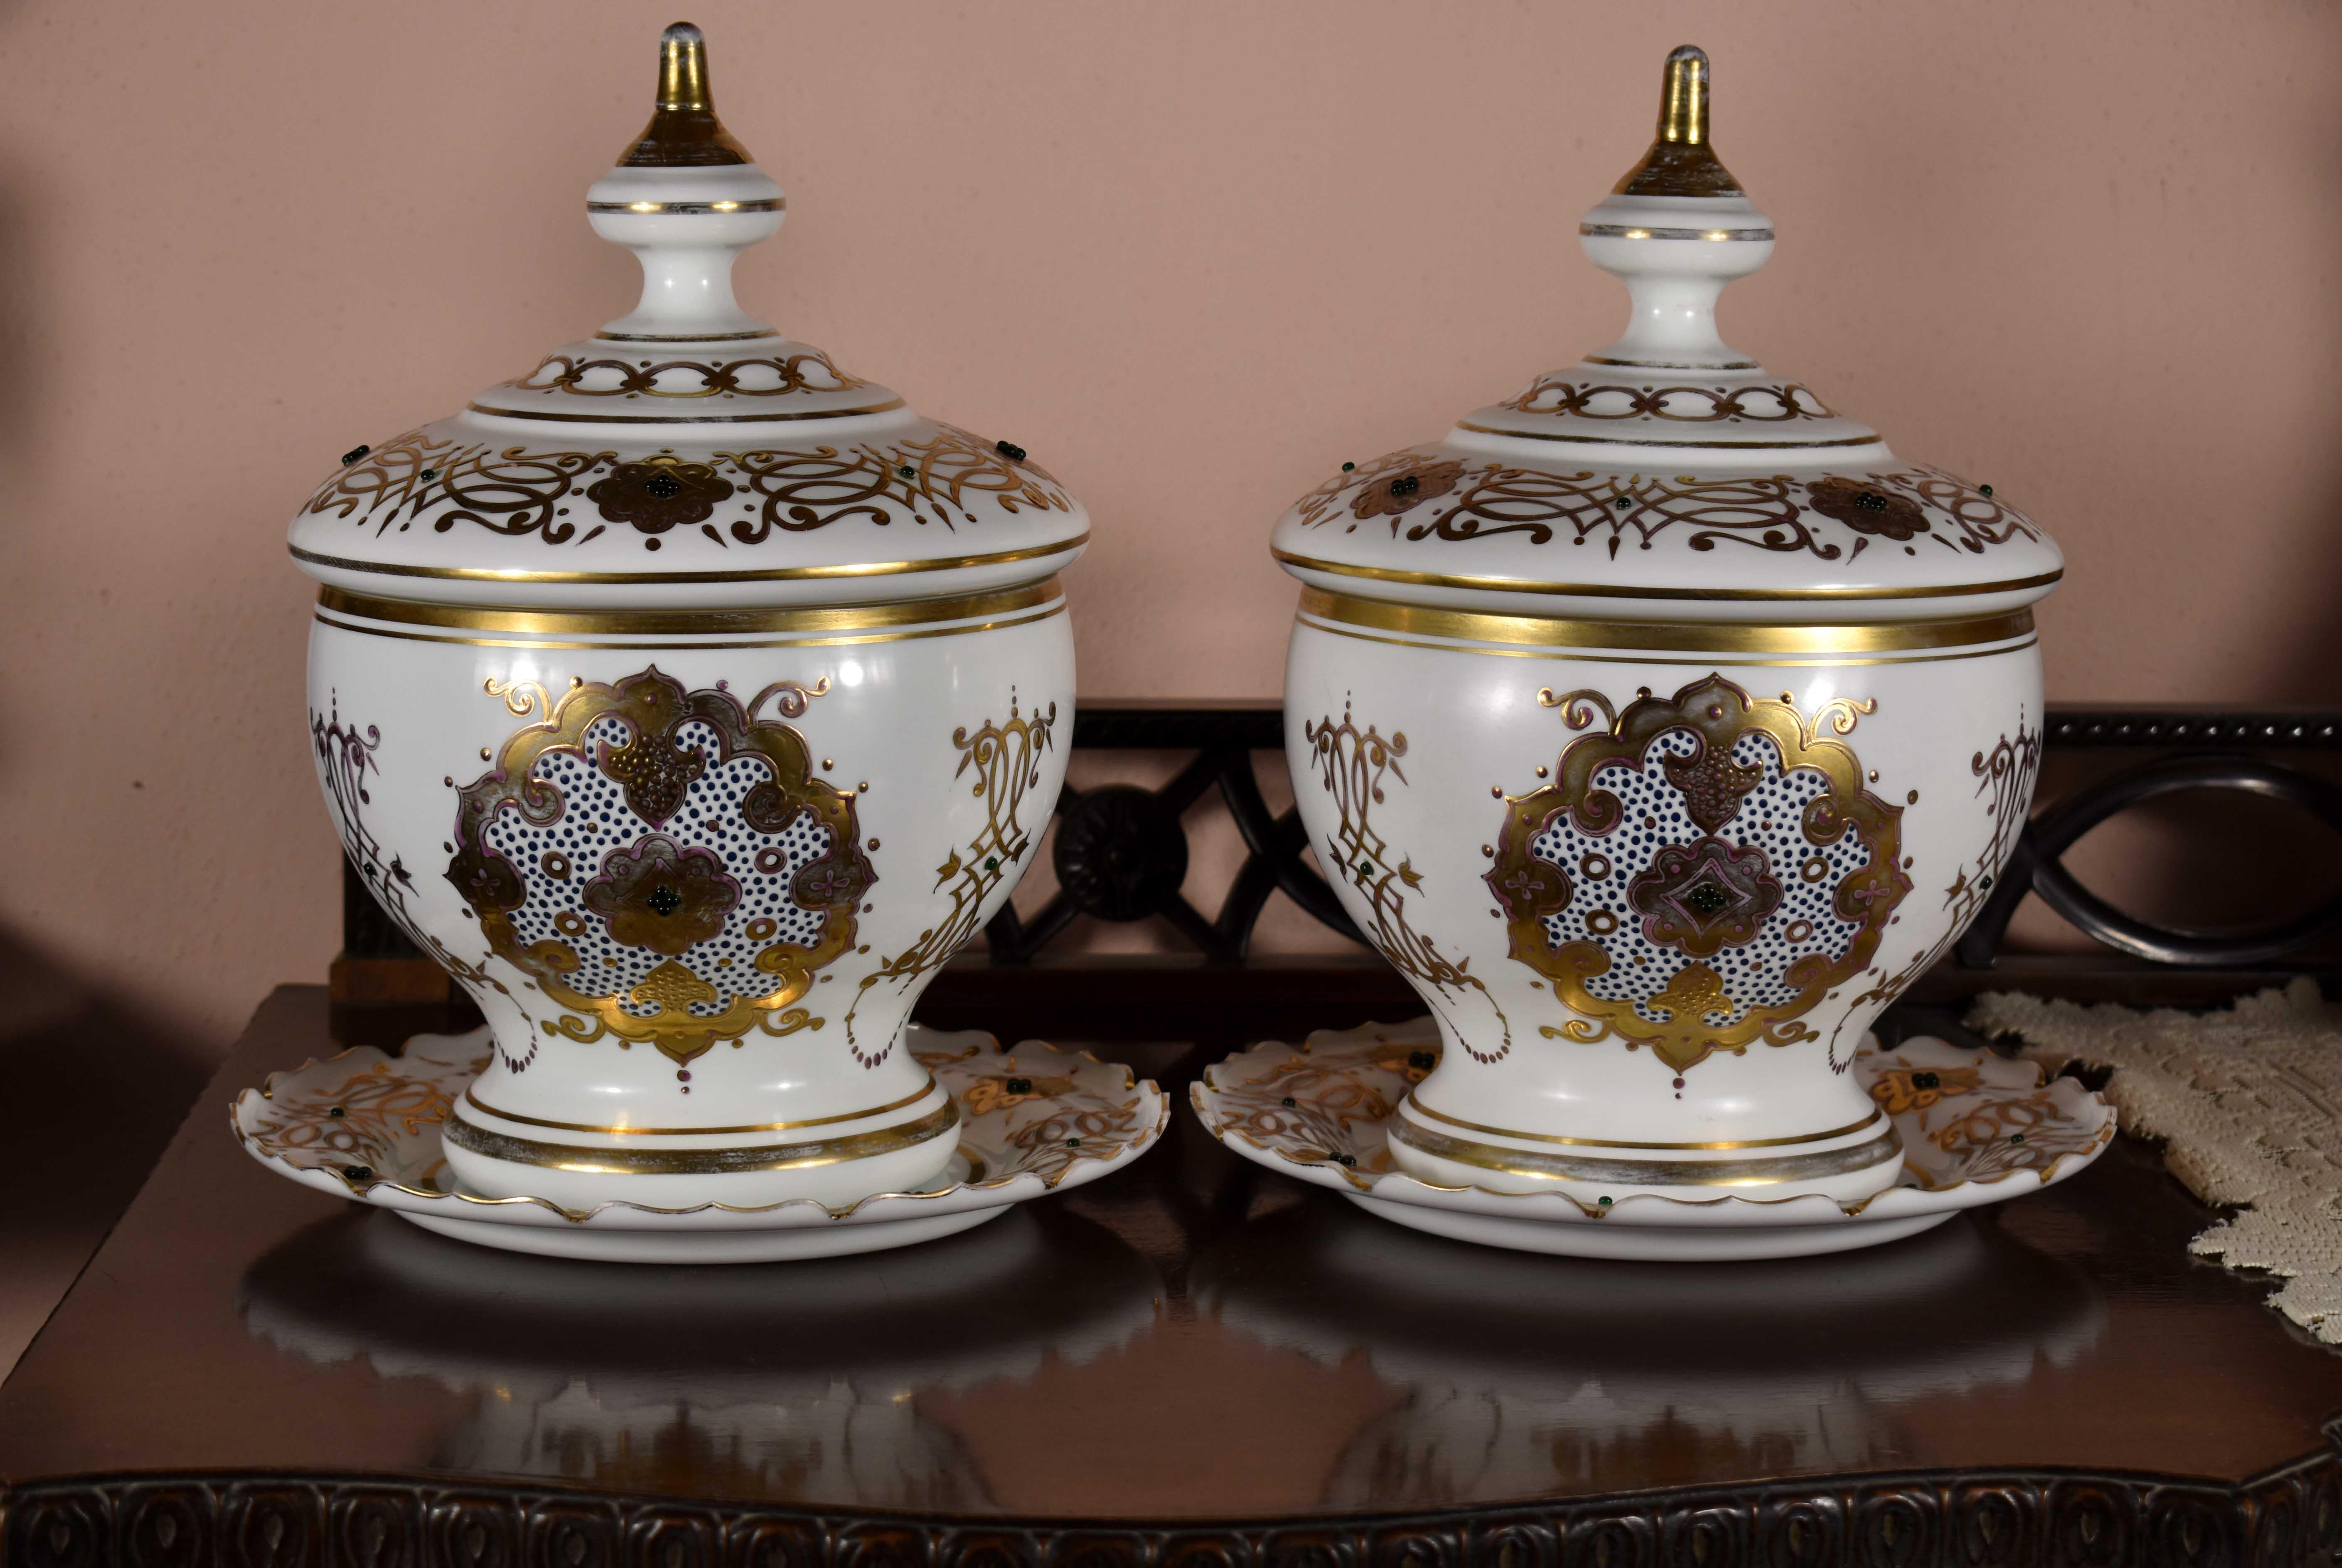 A pair of historic glass bomboniers made of opal glass decorated with embossed gilded painting and glass beads. Bohemian glass made for the Ottoman market.